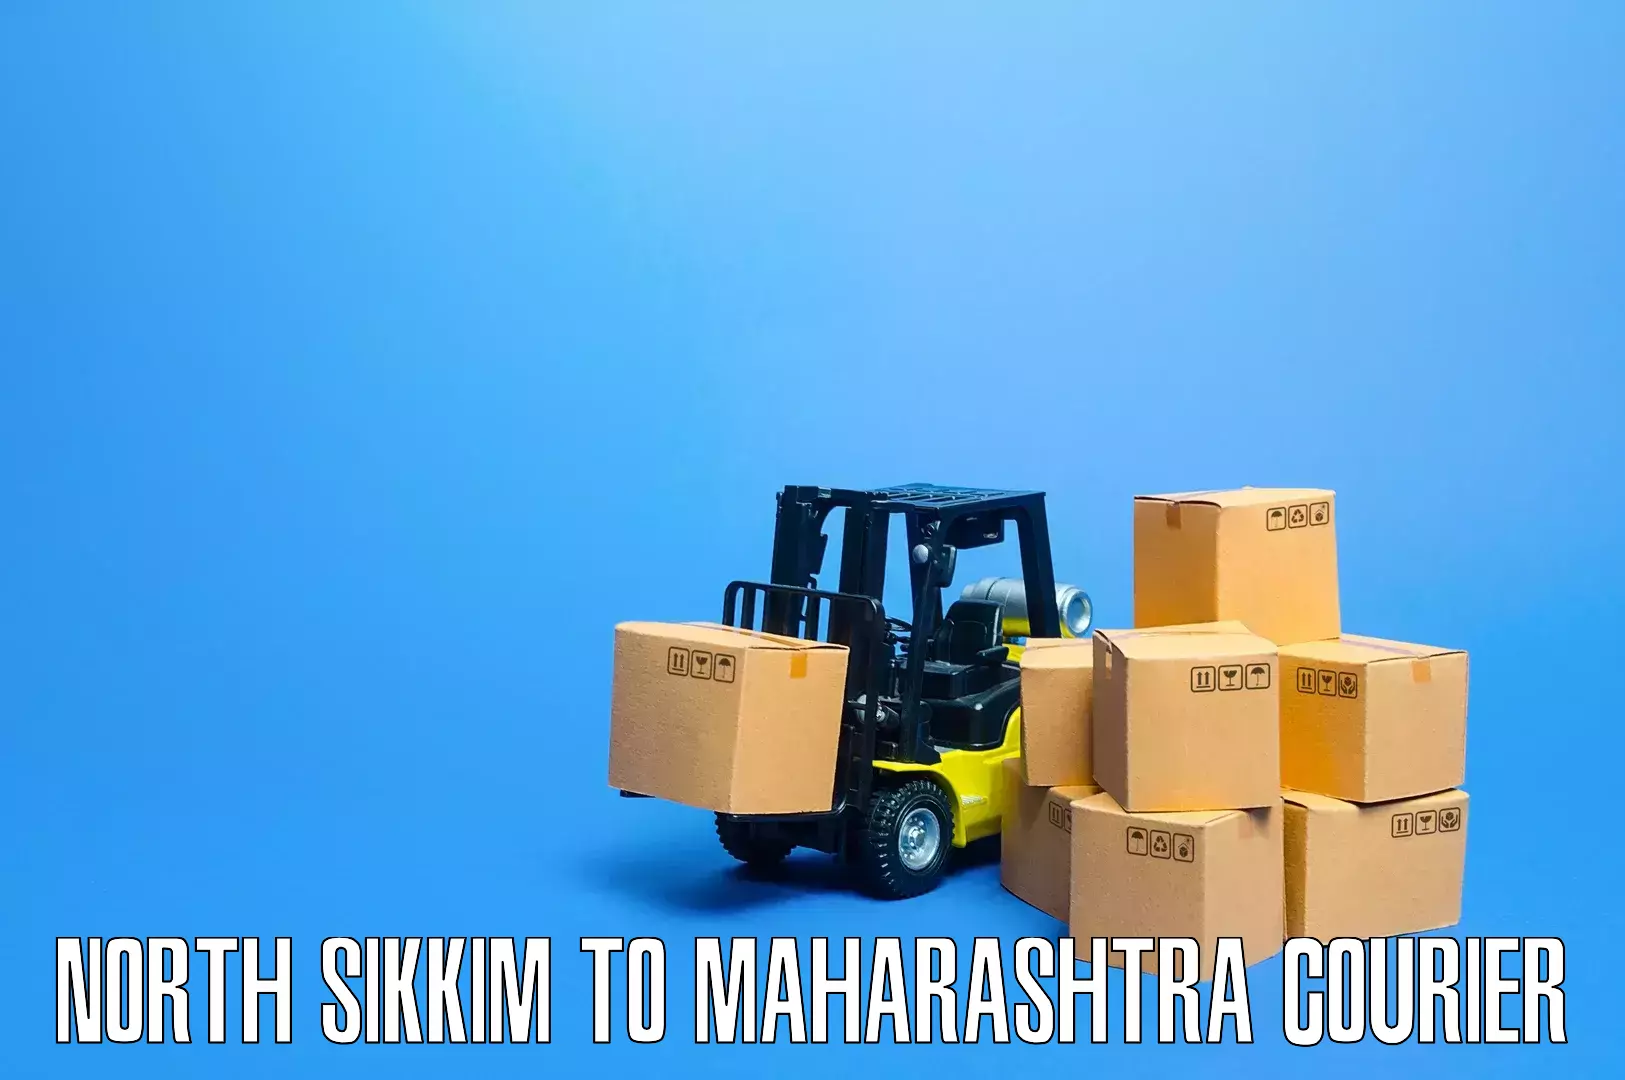 Specialized moving company in North Sikkim to Sironcha